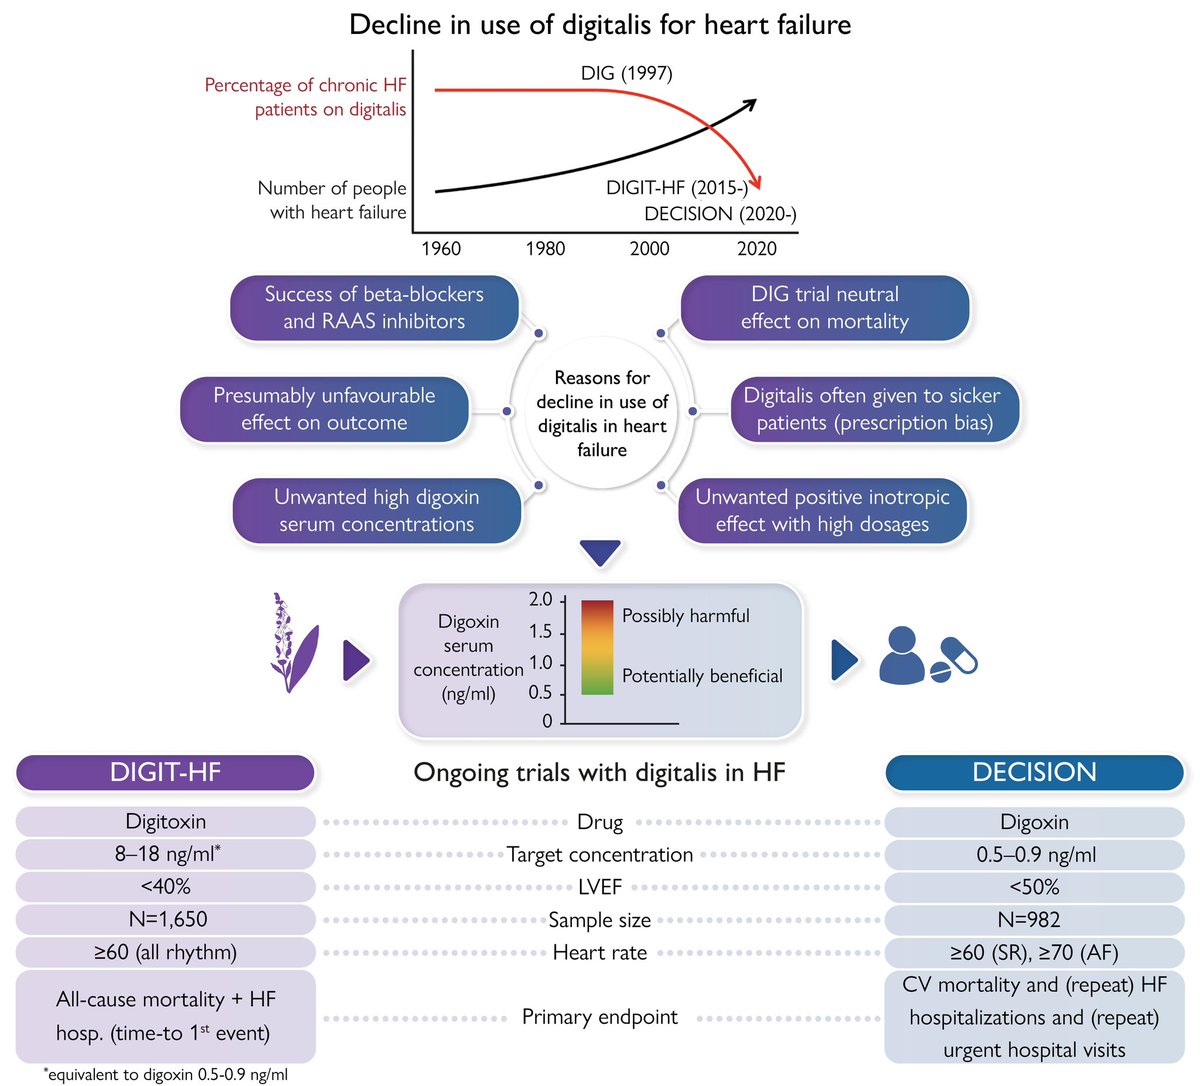 Digitalis in heart failure: declining use and ongoing outcome trials

Veldhuisen & Bauersachs @ EHJ @ESC_Journals 

well summarized in graphical abstract

@pjsm83 @mencardio @mspartalis5 @FH_Verbrugge @CSHeartResearch @lFa1d @Ahmed43101178 @KSharmaMD @iamritu @HanCardiomd